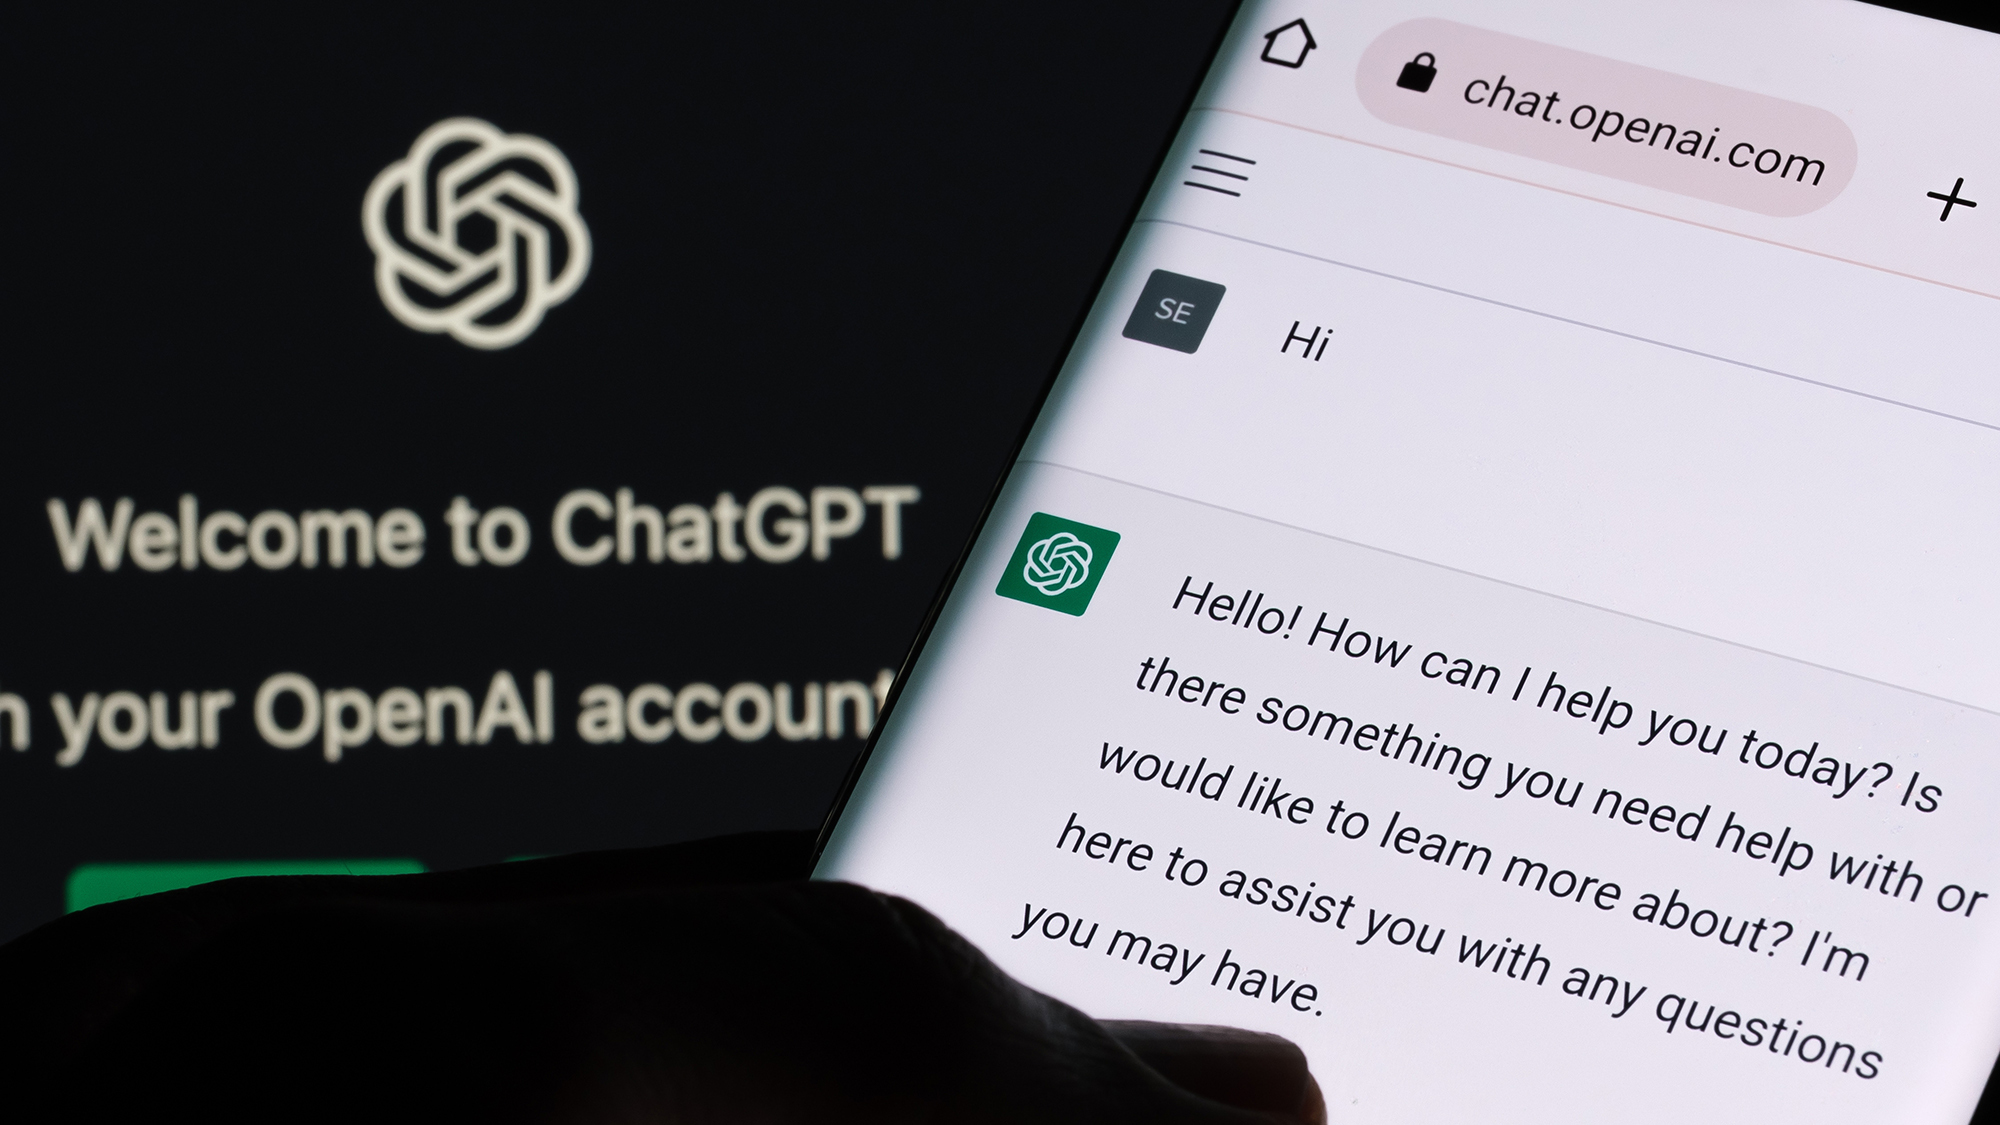 ChatGPT AI chatbot from Open AI